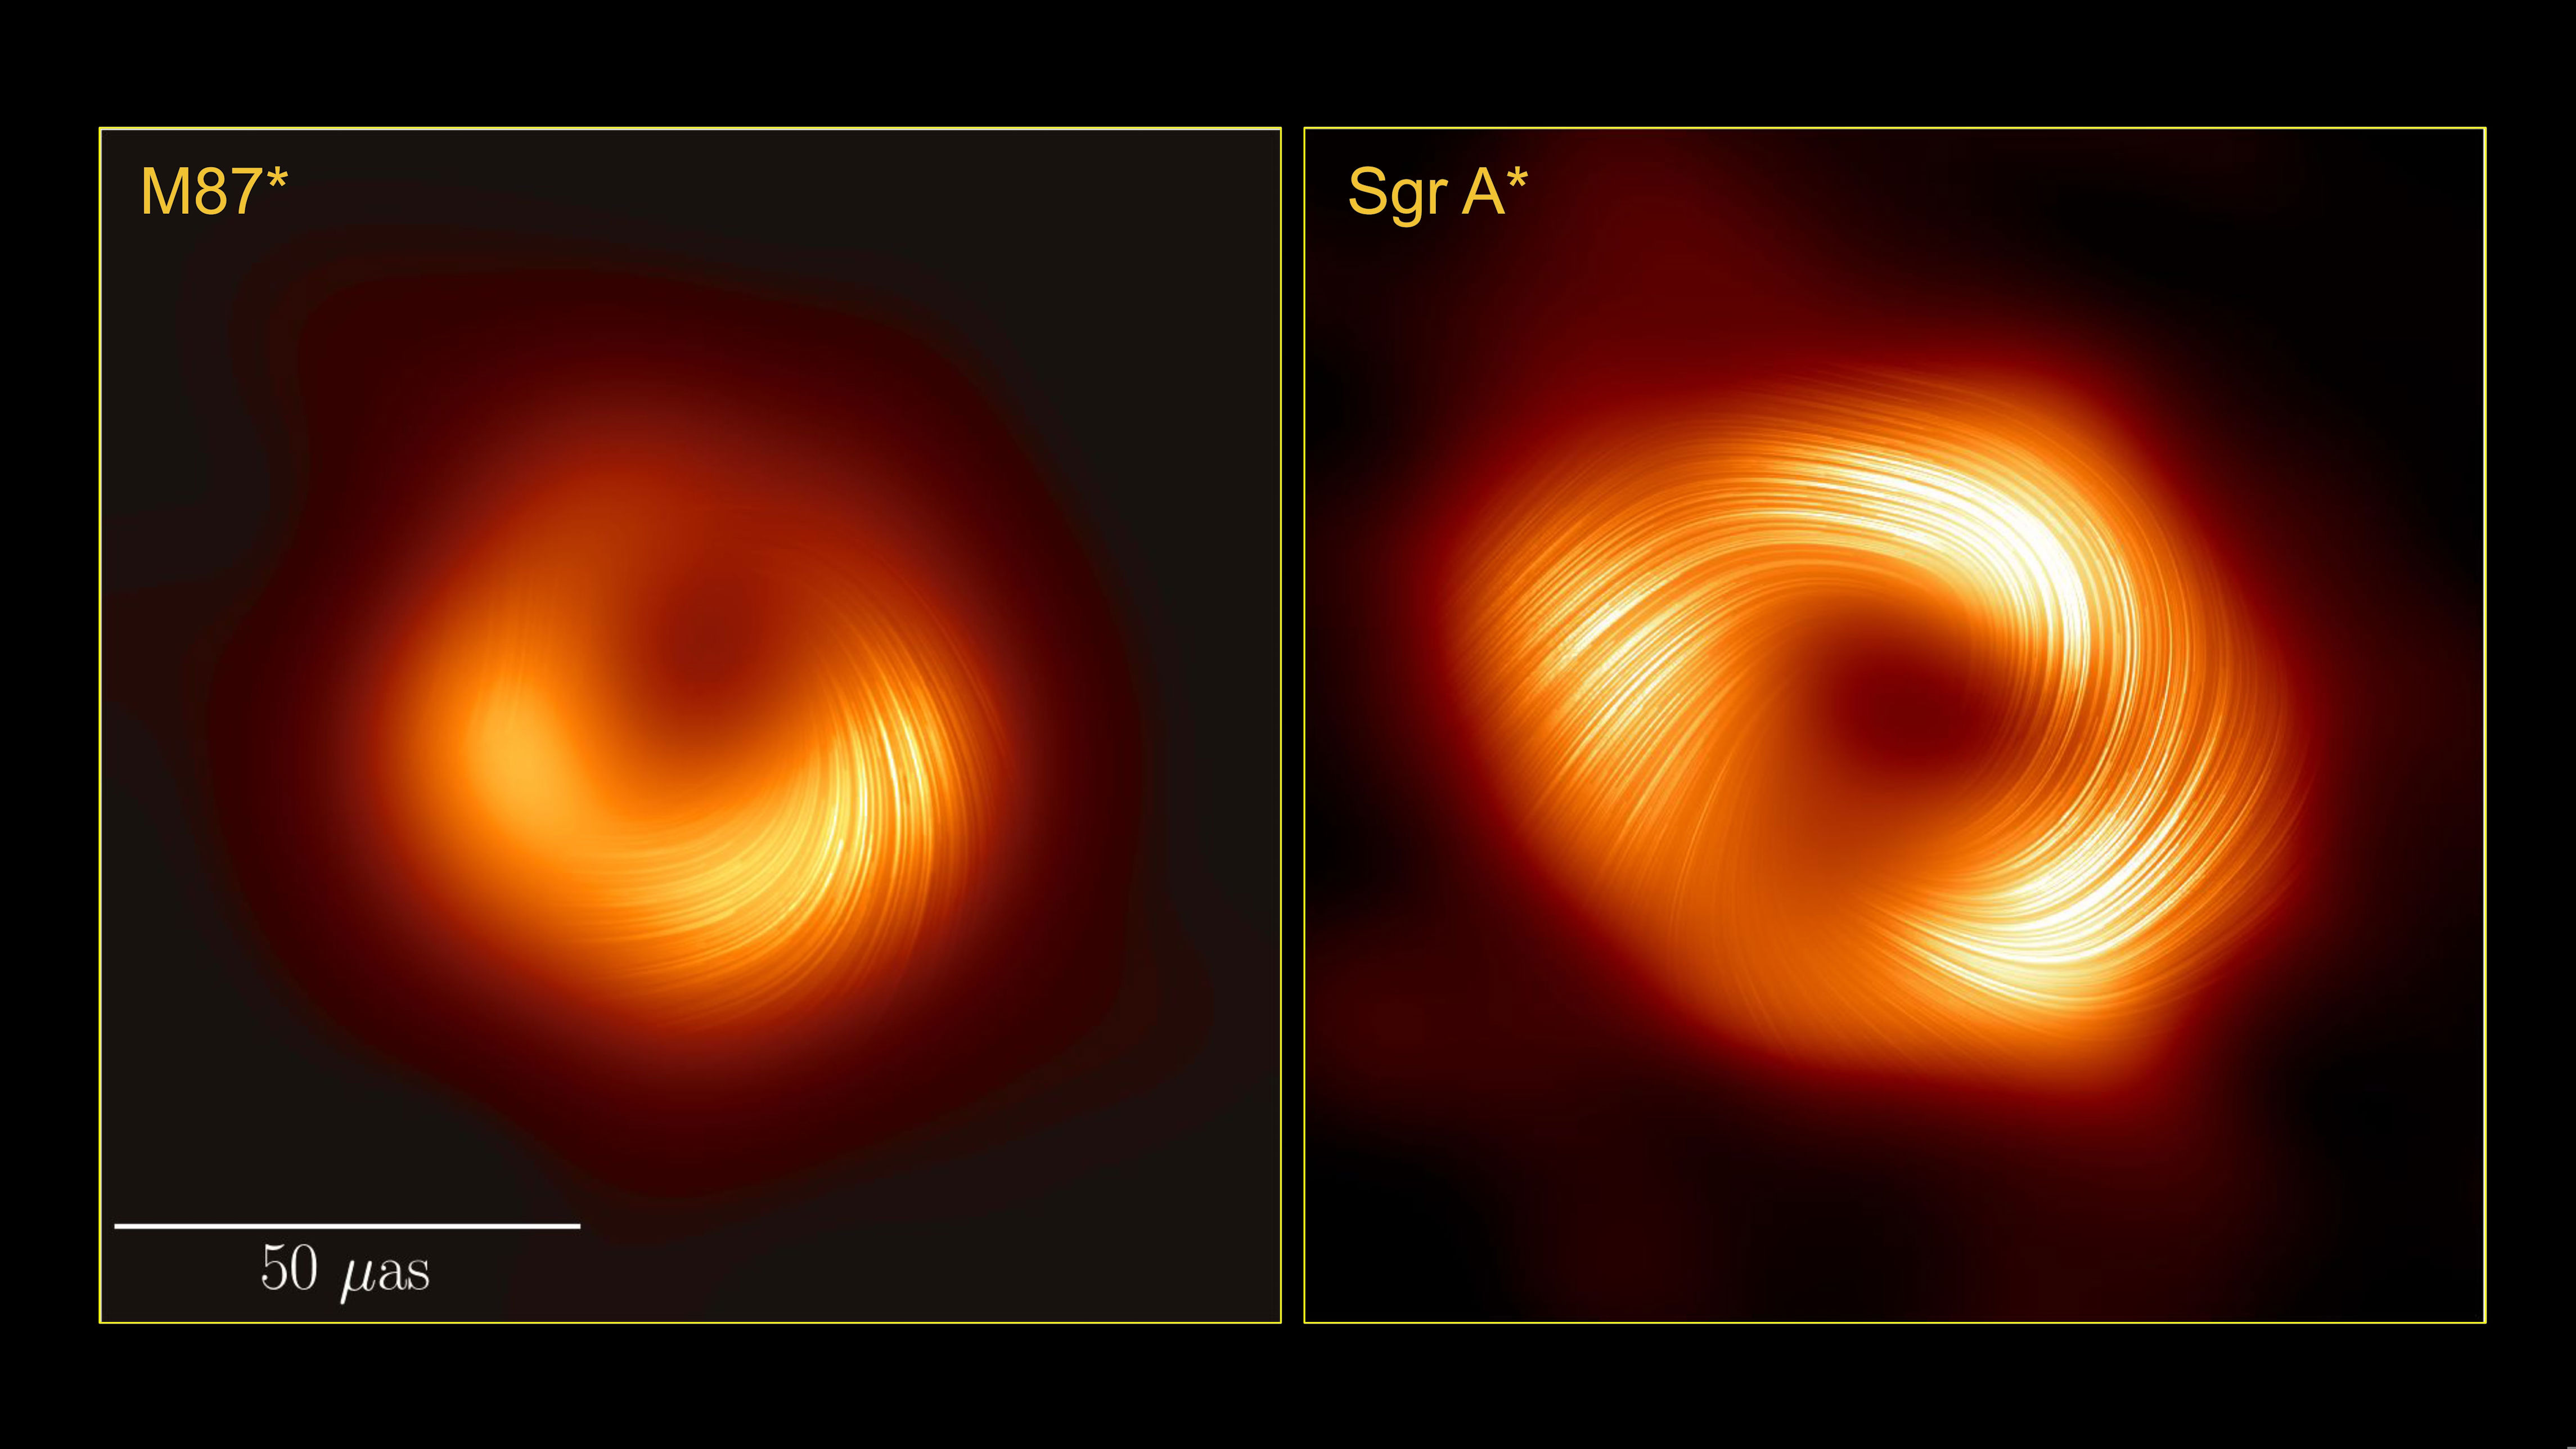 scientists reveal astonishing image of black hole in our galaxy